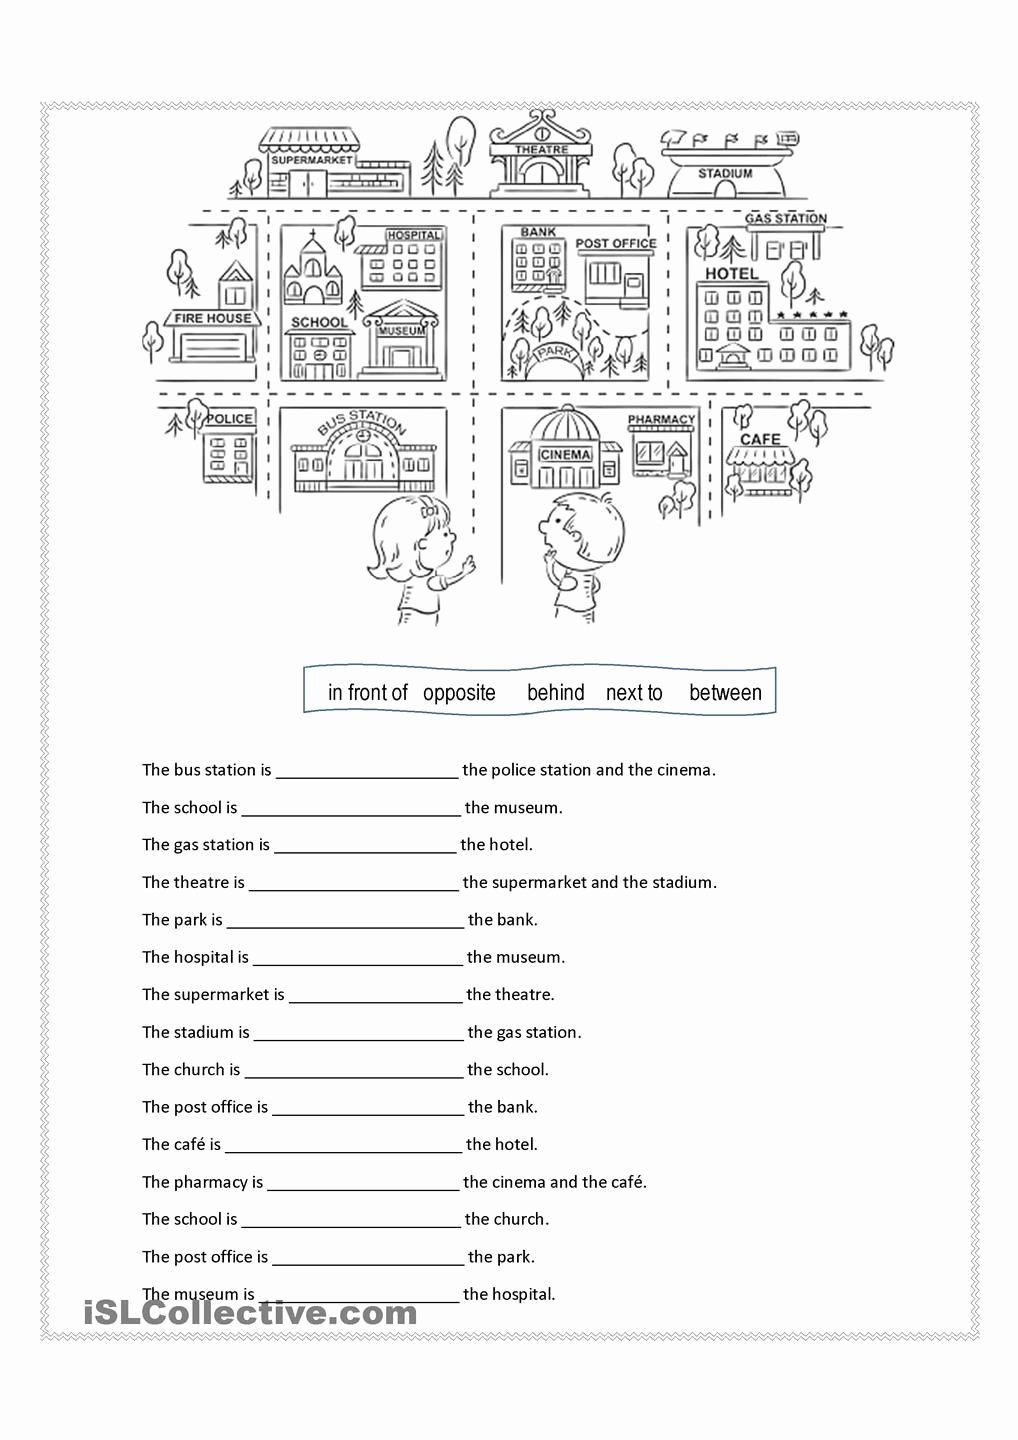 Prepositions Worksheets Middle School Beautiful Preposition Worksheets for Middle School